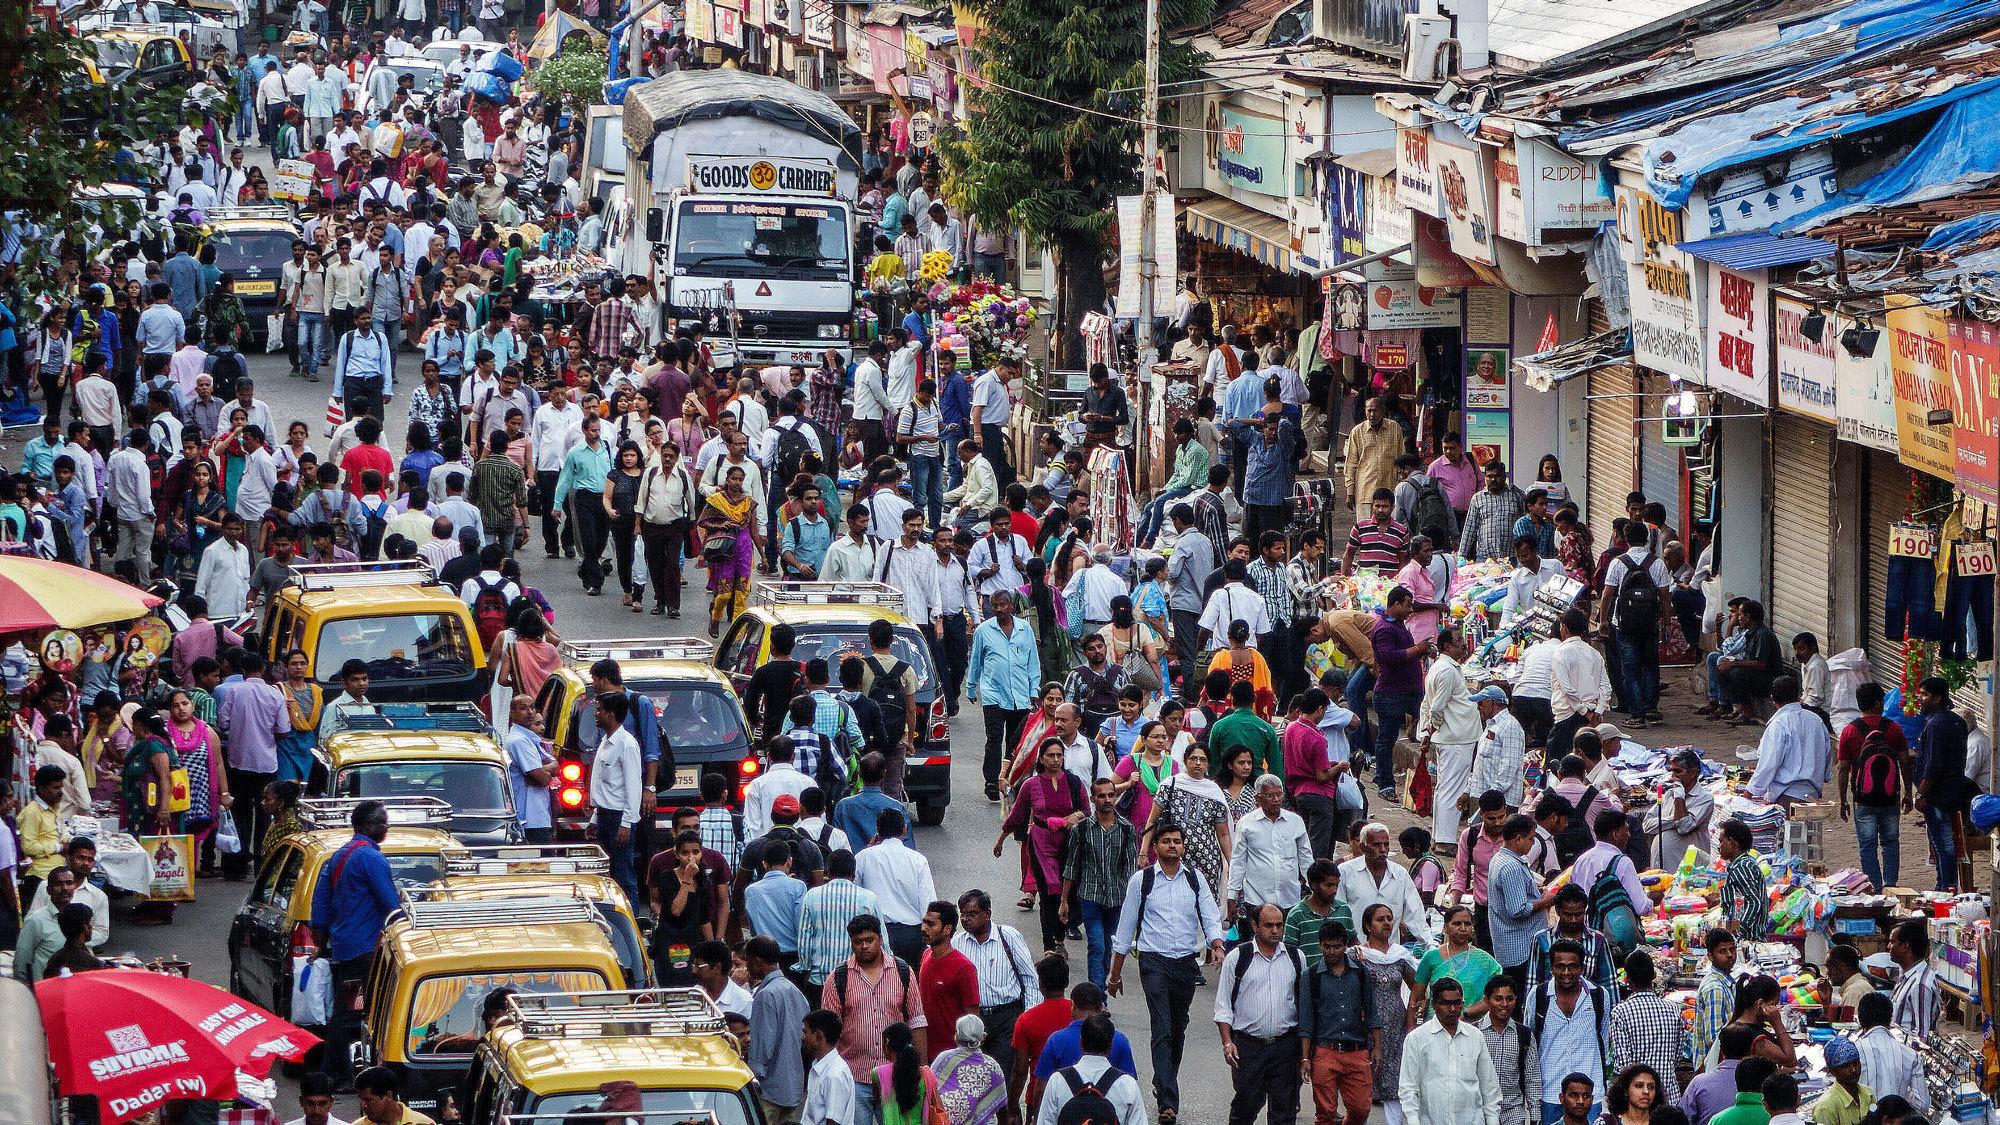 Why India Is Making Progress in Slowing Its Population Growth - Yale E360